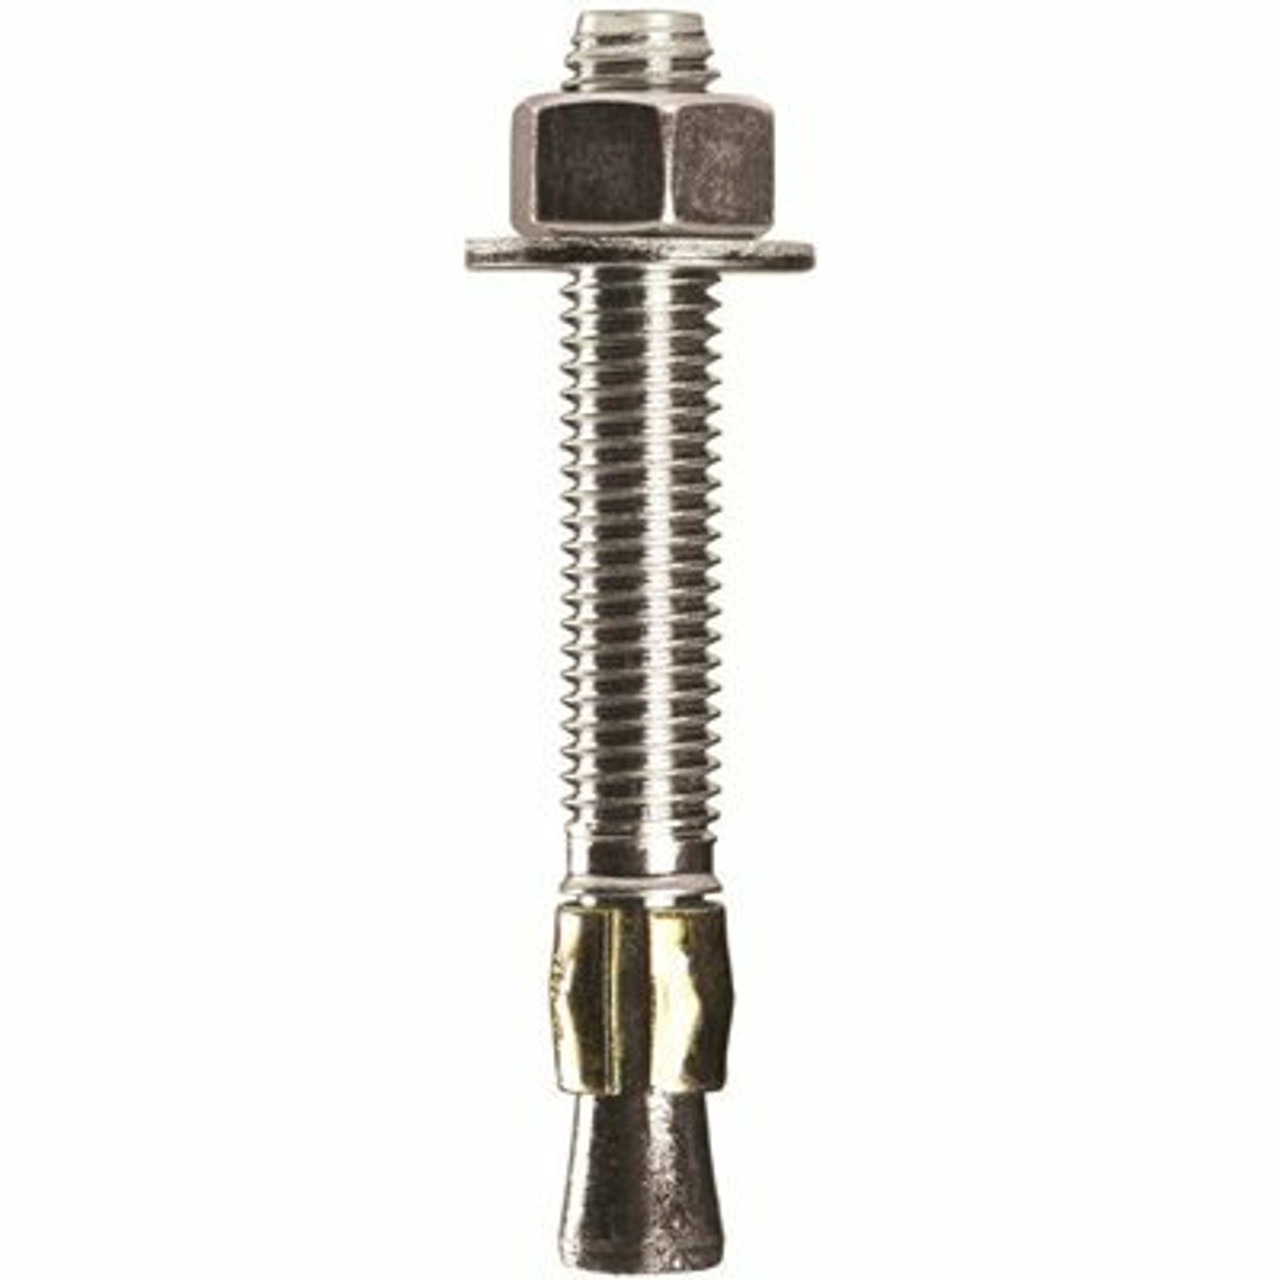 1/2 In. X 3-3/4 In. Wedge Anchor (10-Pack)